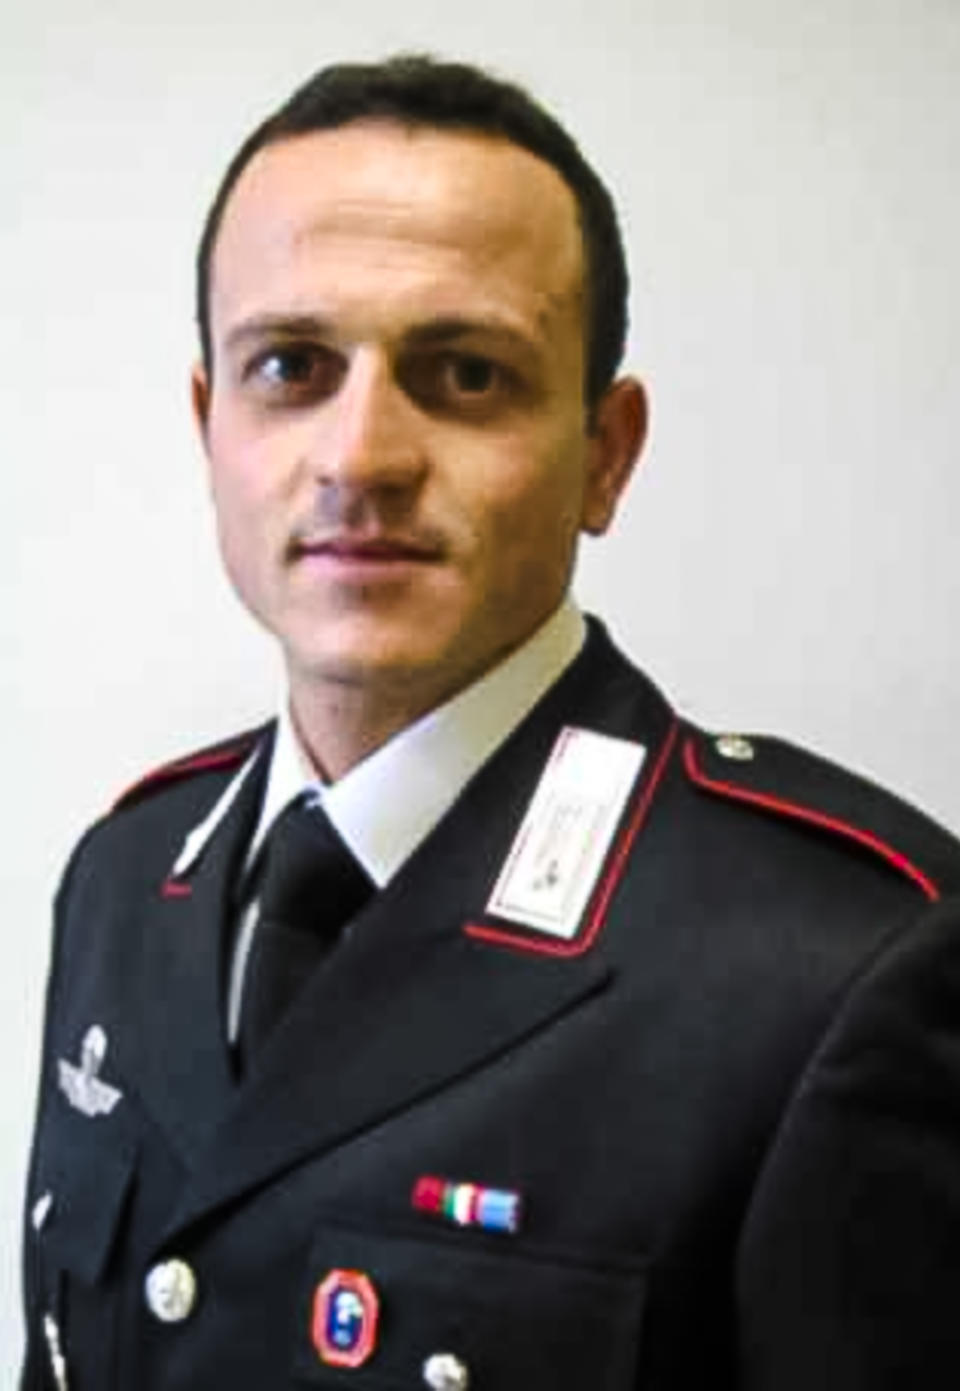 This picture released by the Italian Carabinieri Press Office on Monday, Feb. 22, 2021, shows late Carabinieri officer Vittorio Iacovacci who was killed in an ambush on Monday, together with the Italian Ambassador to Congo Luca Attanasio, while they were traveling in a U.N. convoy in Nyiragongo, North Kivu province, Congo Monday, Feb. 22, 2021. Their Congolese driver was killed too in an area that is home to myriad rebel groups, the Foreign Ministry and local people said. (Italian Carabinieri Press Office via AP)